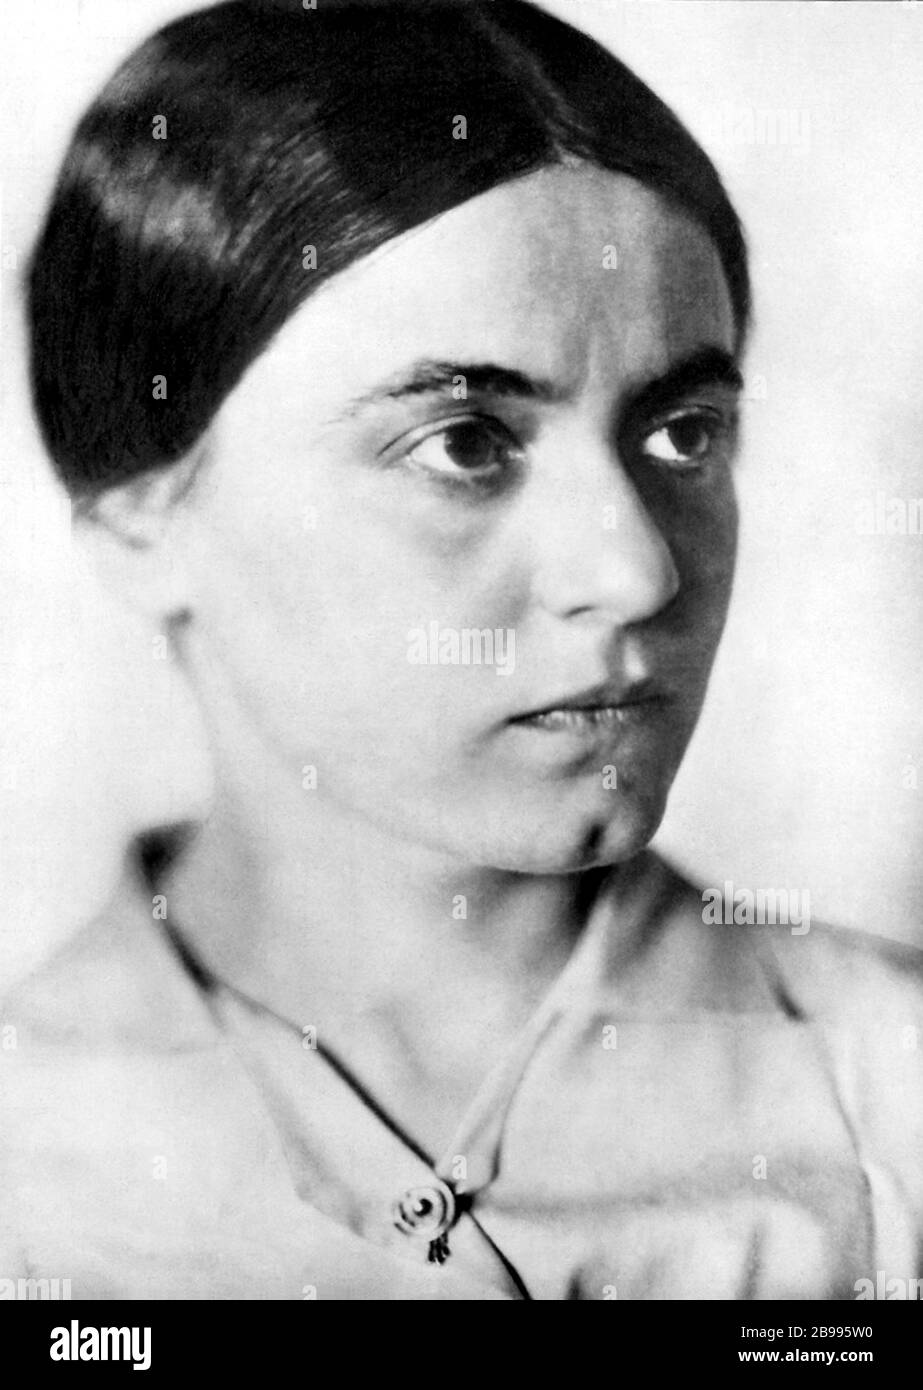 1940 c, GERMANY: The german woman philosopher and nun  EDITH STEIN ( 1891 - 1942 ). Born in jewish familly converted to Catholic Religion and became nun in Carmelitans Order , killed during the Shoah by nazism in  Auschwitz extermition camp. She is canonized as a Martyr and Saint of the Catholic Church in 199 by Pope John Paul II, she is one of six co-patron saints of Europe. - SCRITTORE - SCRITRICE - Santità - SANTA - San - LETTERATURA - LITERATURE - letterata - FILOSOFA - FILOSOFO - FILOSOFIA - PHILOSOPHY - portrait - ritratto - convertita - Martire - Canonizzazione - Canonizzata - RELIGIONE Stock Photo